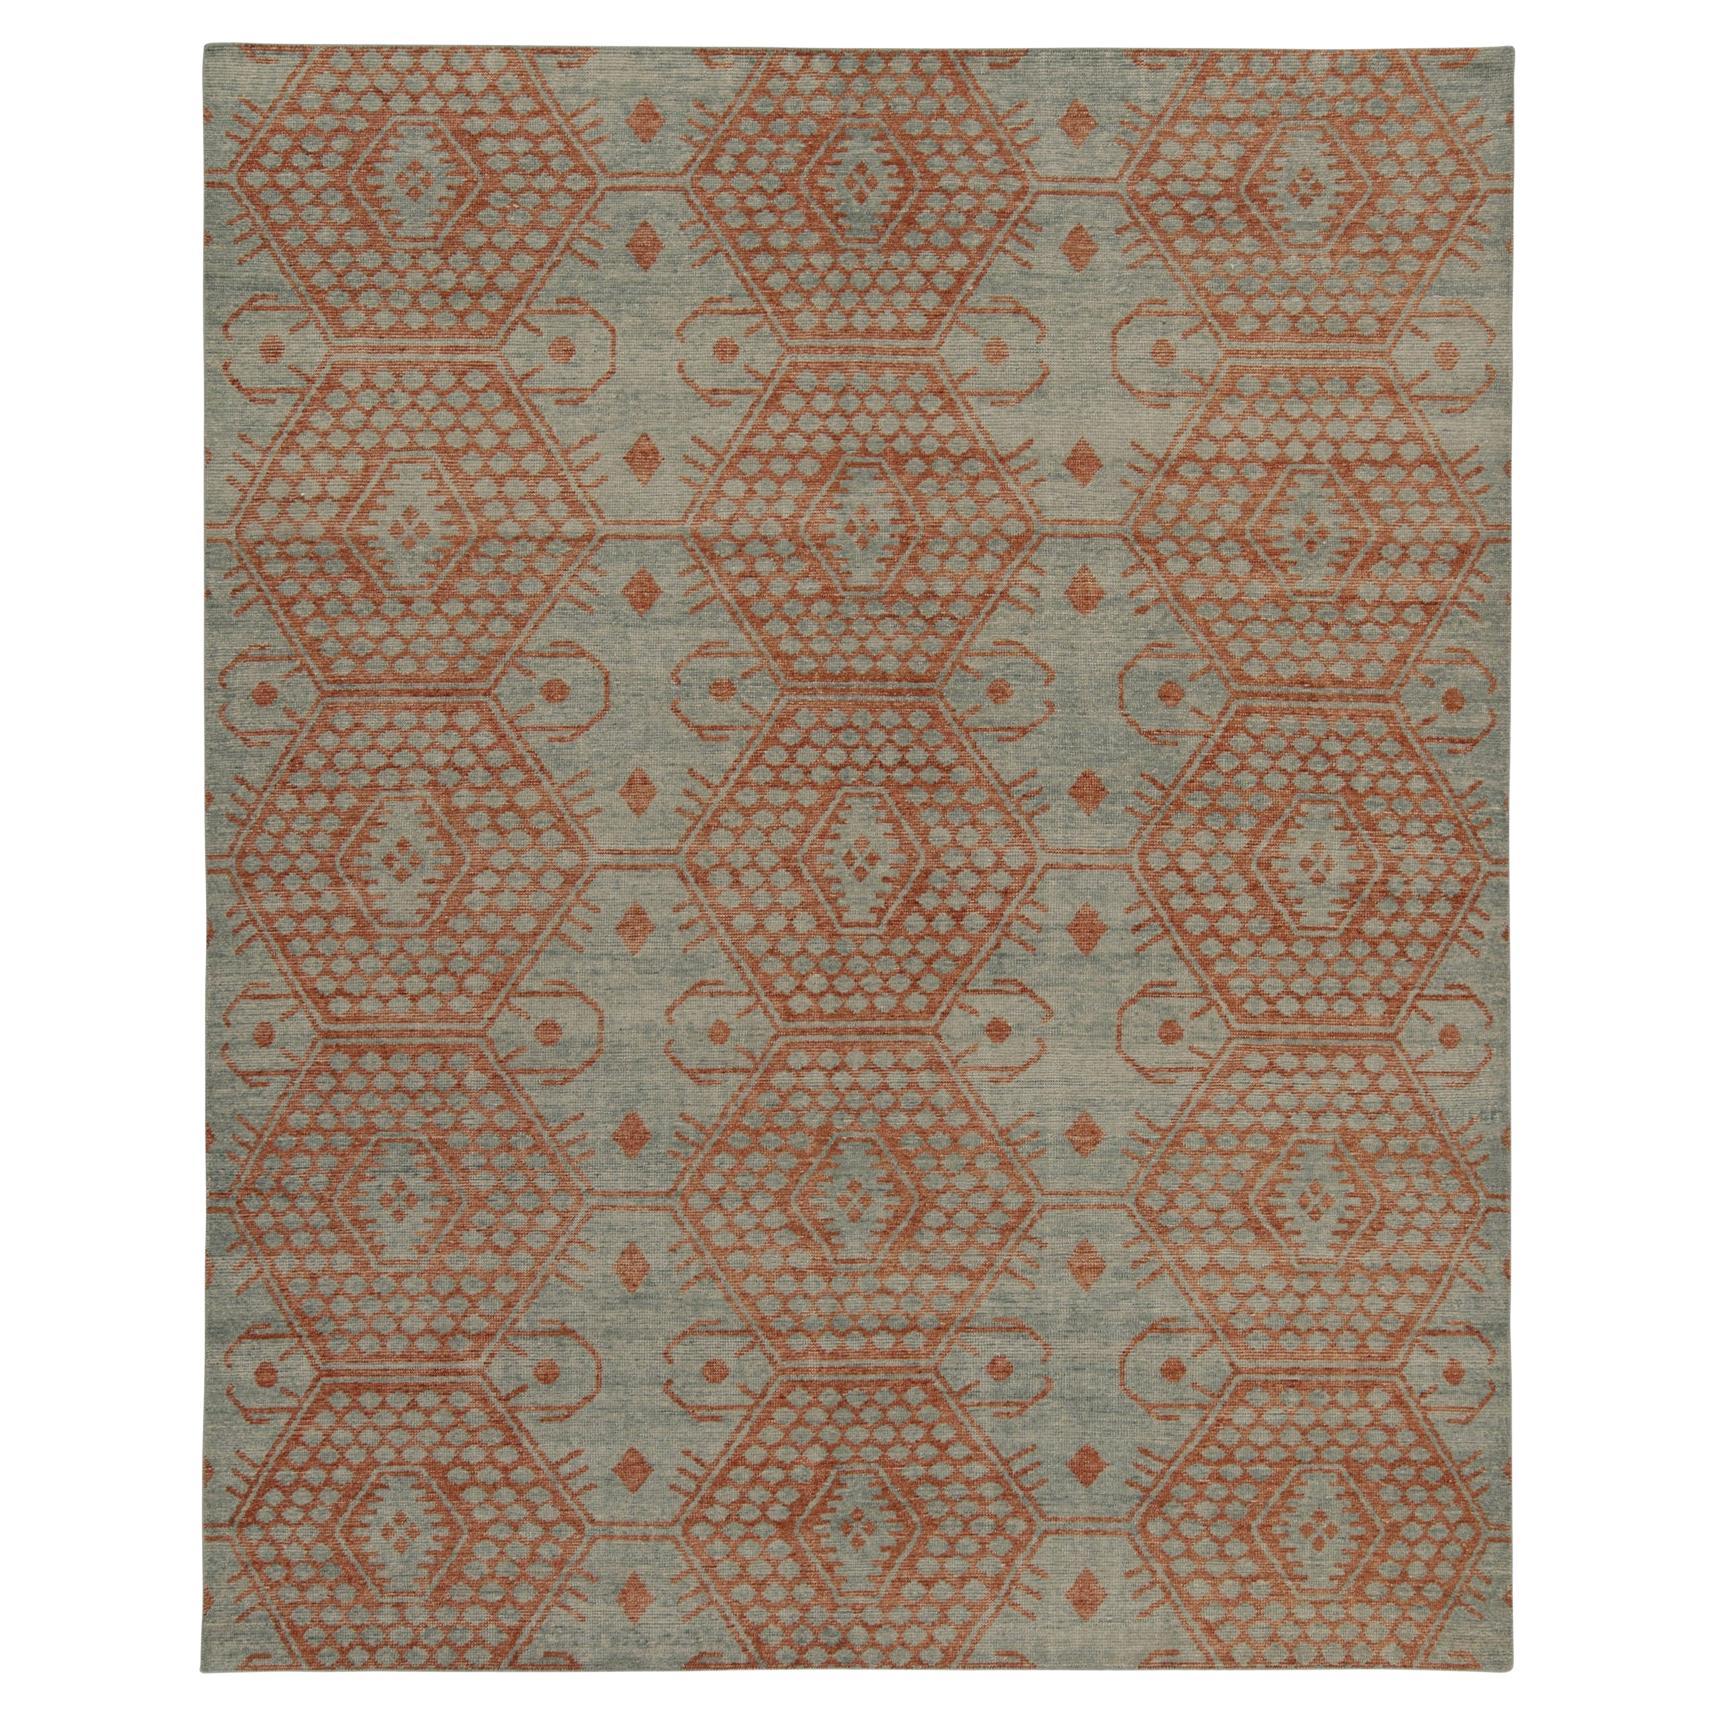 Rug & Kilim’s Distressed Style Rug in Blue and Rust Orange Geometric Patterns For Sale